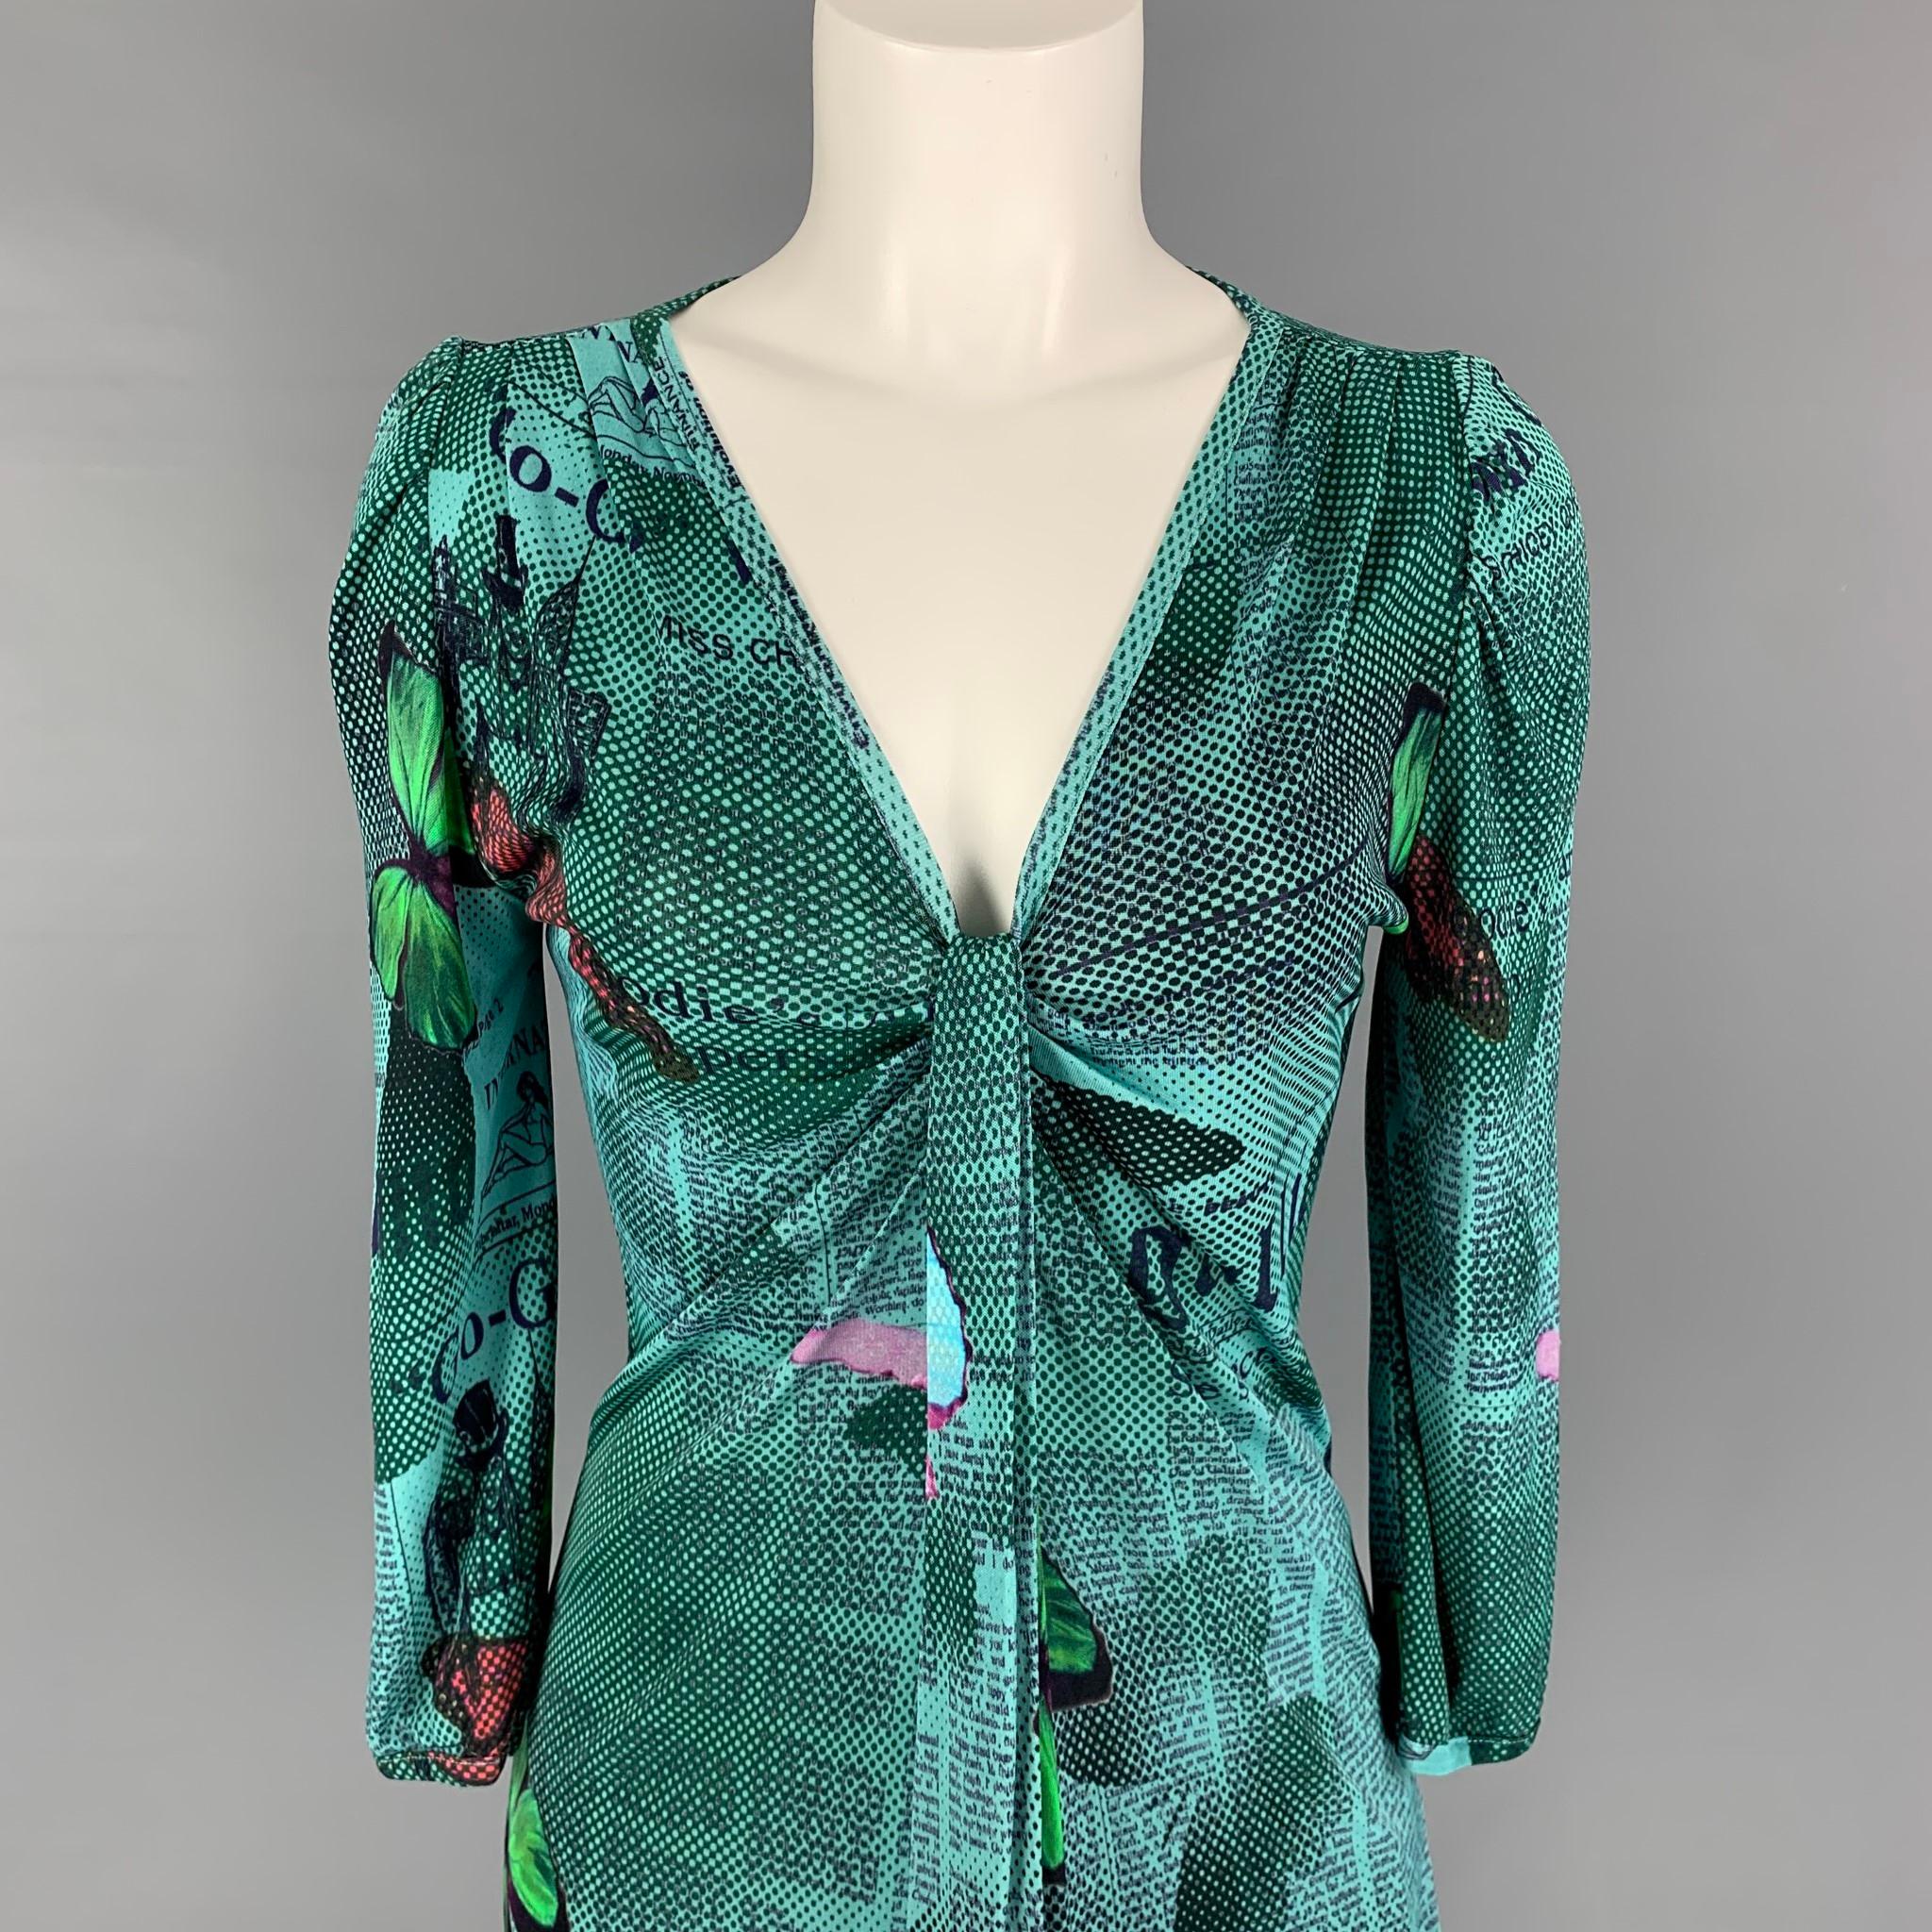 Vintage JOHN GALLIANO blouse comes in a multi-color jersey 'Gazette Newsprint' viscose featuring a front ruched design and a v-neck. Made in Italy. 

Excellent Pre-Owned Condition.
Marked: XS

Measurements:

Shoulder: 14 in.
Bust: 32 in.
Sleeve: